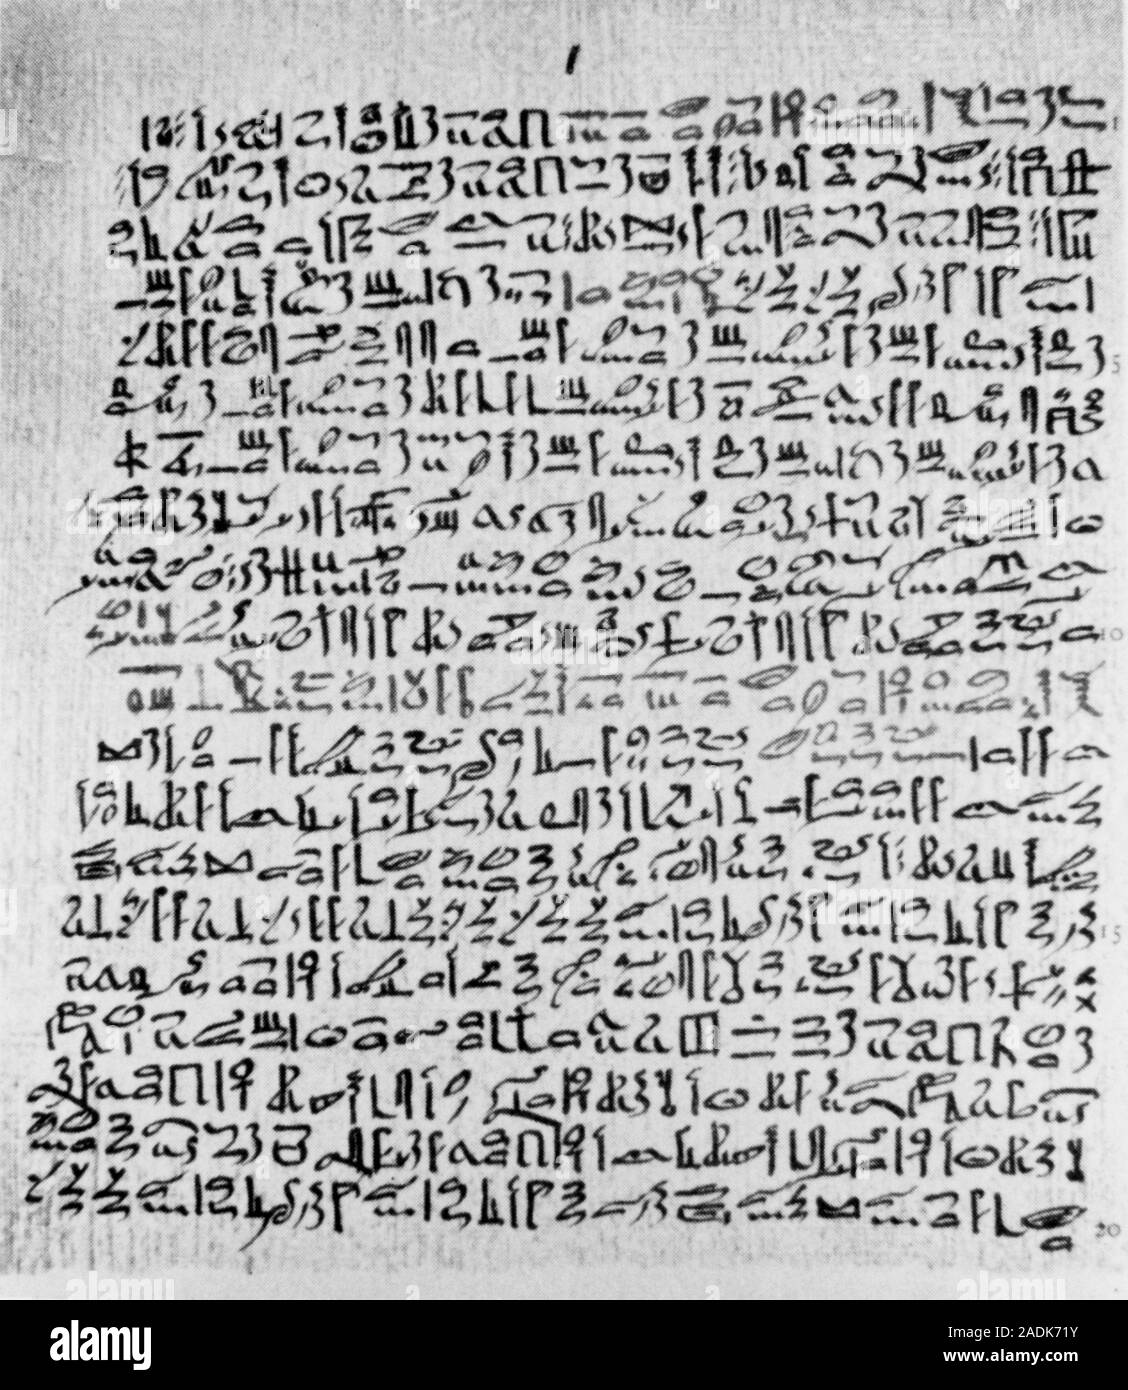 Ebers Papyrus, Ancient Egyptian medicine. First part of the Ebers Papyrus, written in Egypt in about 1570 BC. It is the oldest preserved medical docum Stock Photo